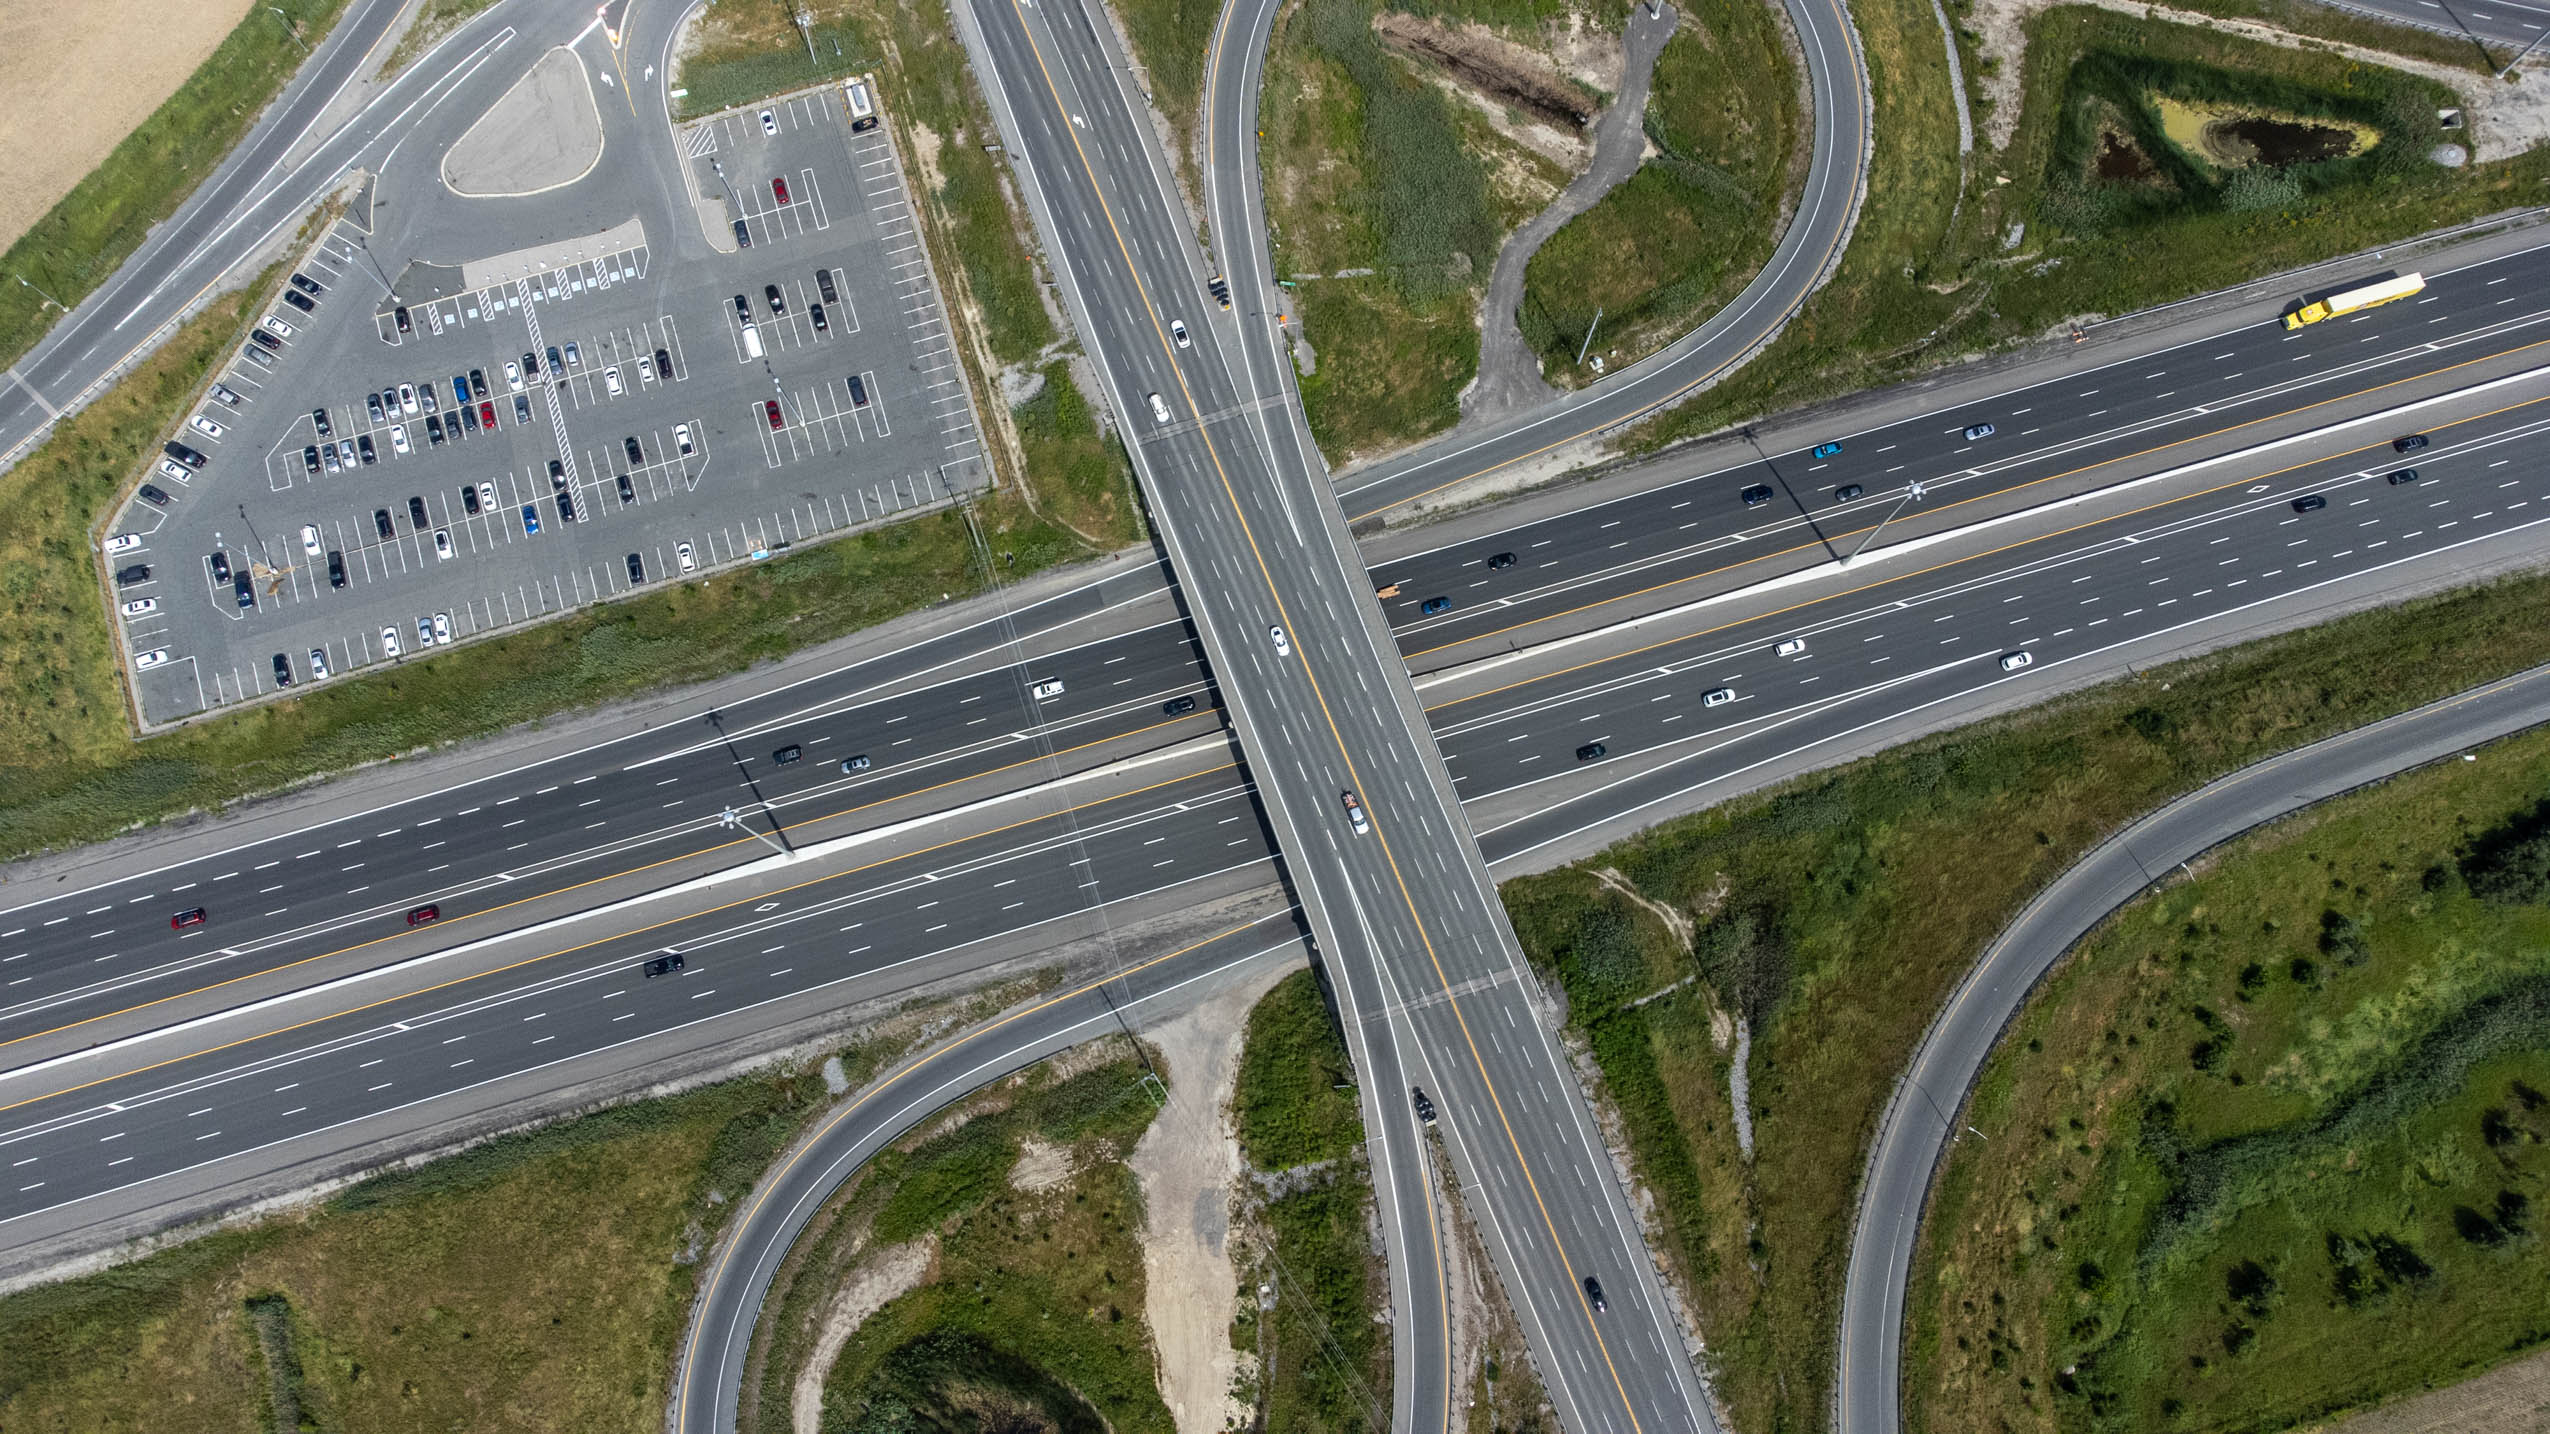 Ontario highways: A highway interchange and parking lot seen from above